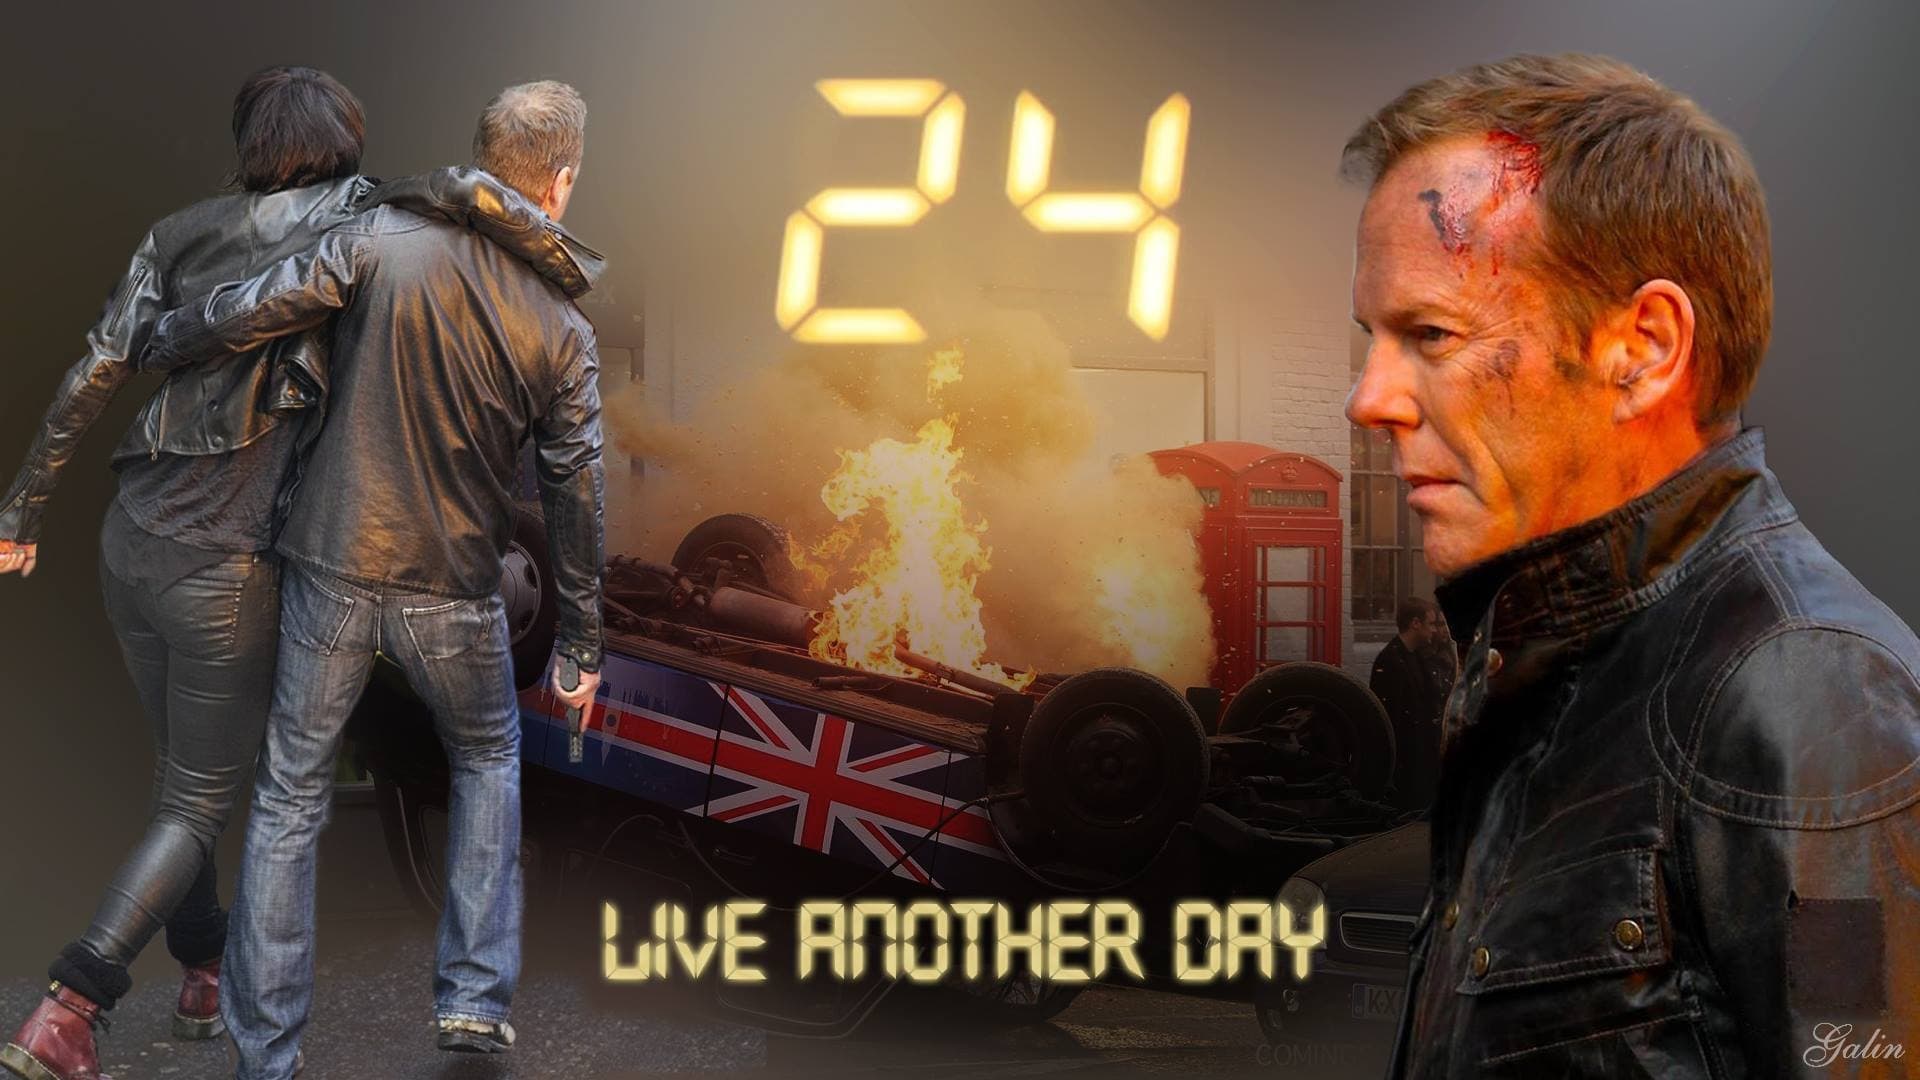 24: Live Another Day